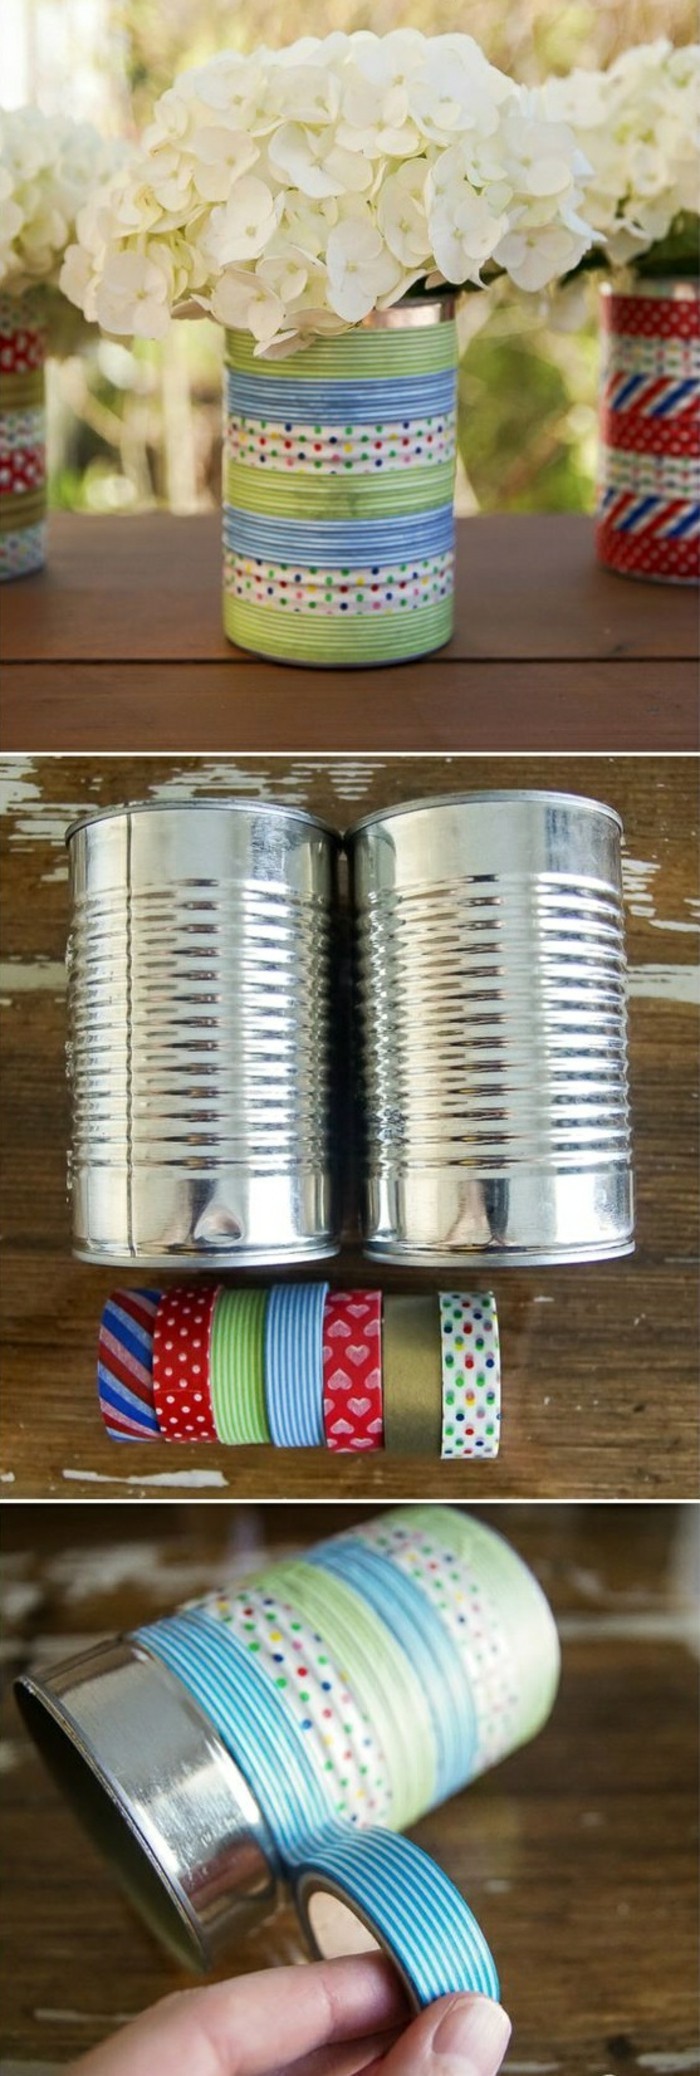 metal tin containers, several vases made from tins containing white hydrangeas, decorated with multicolored washi tape, had wrapping tape around a can